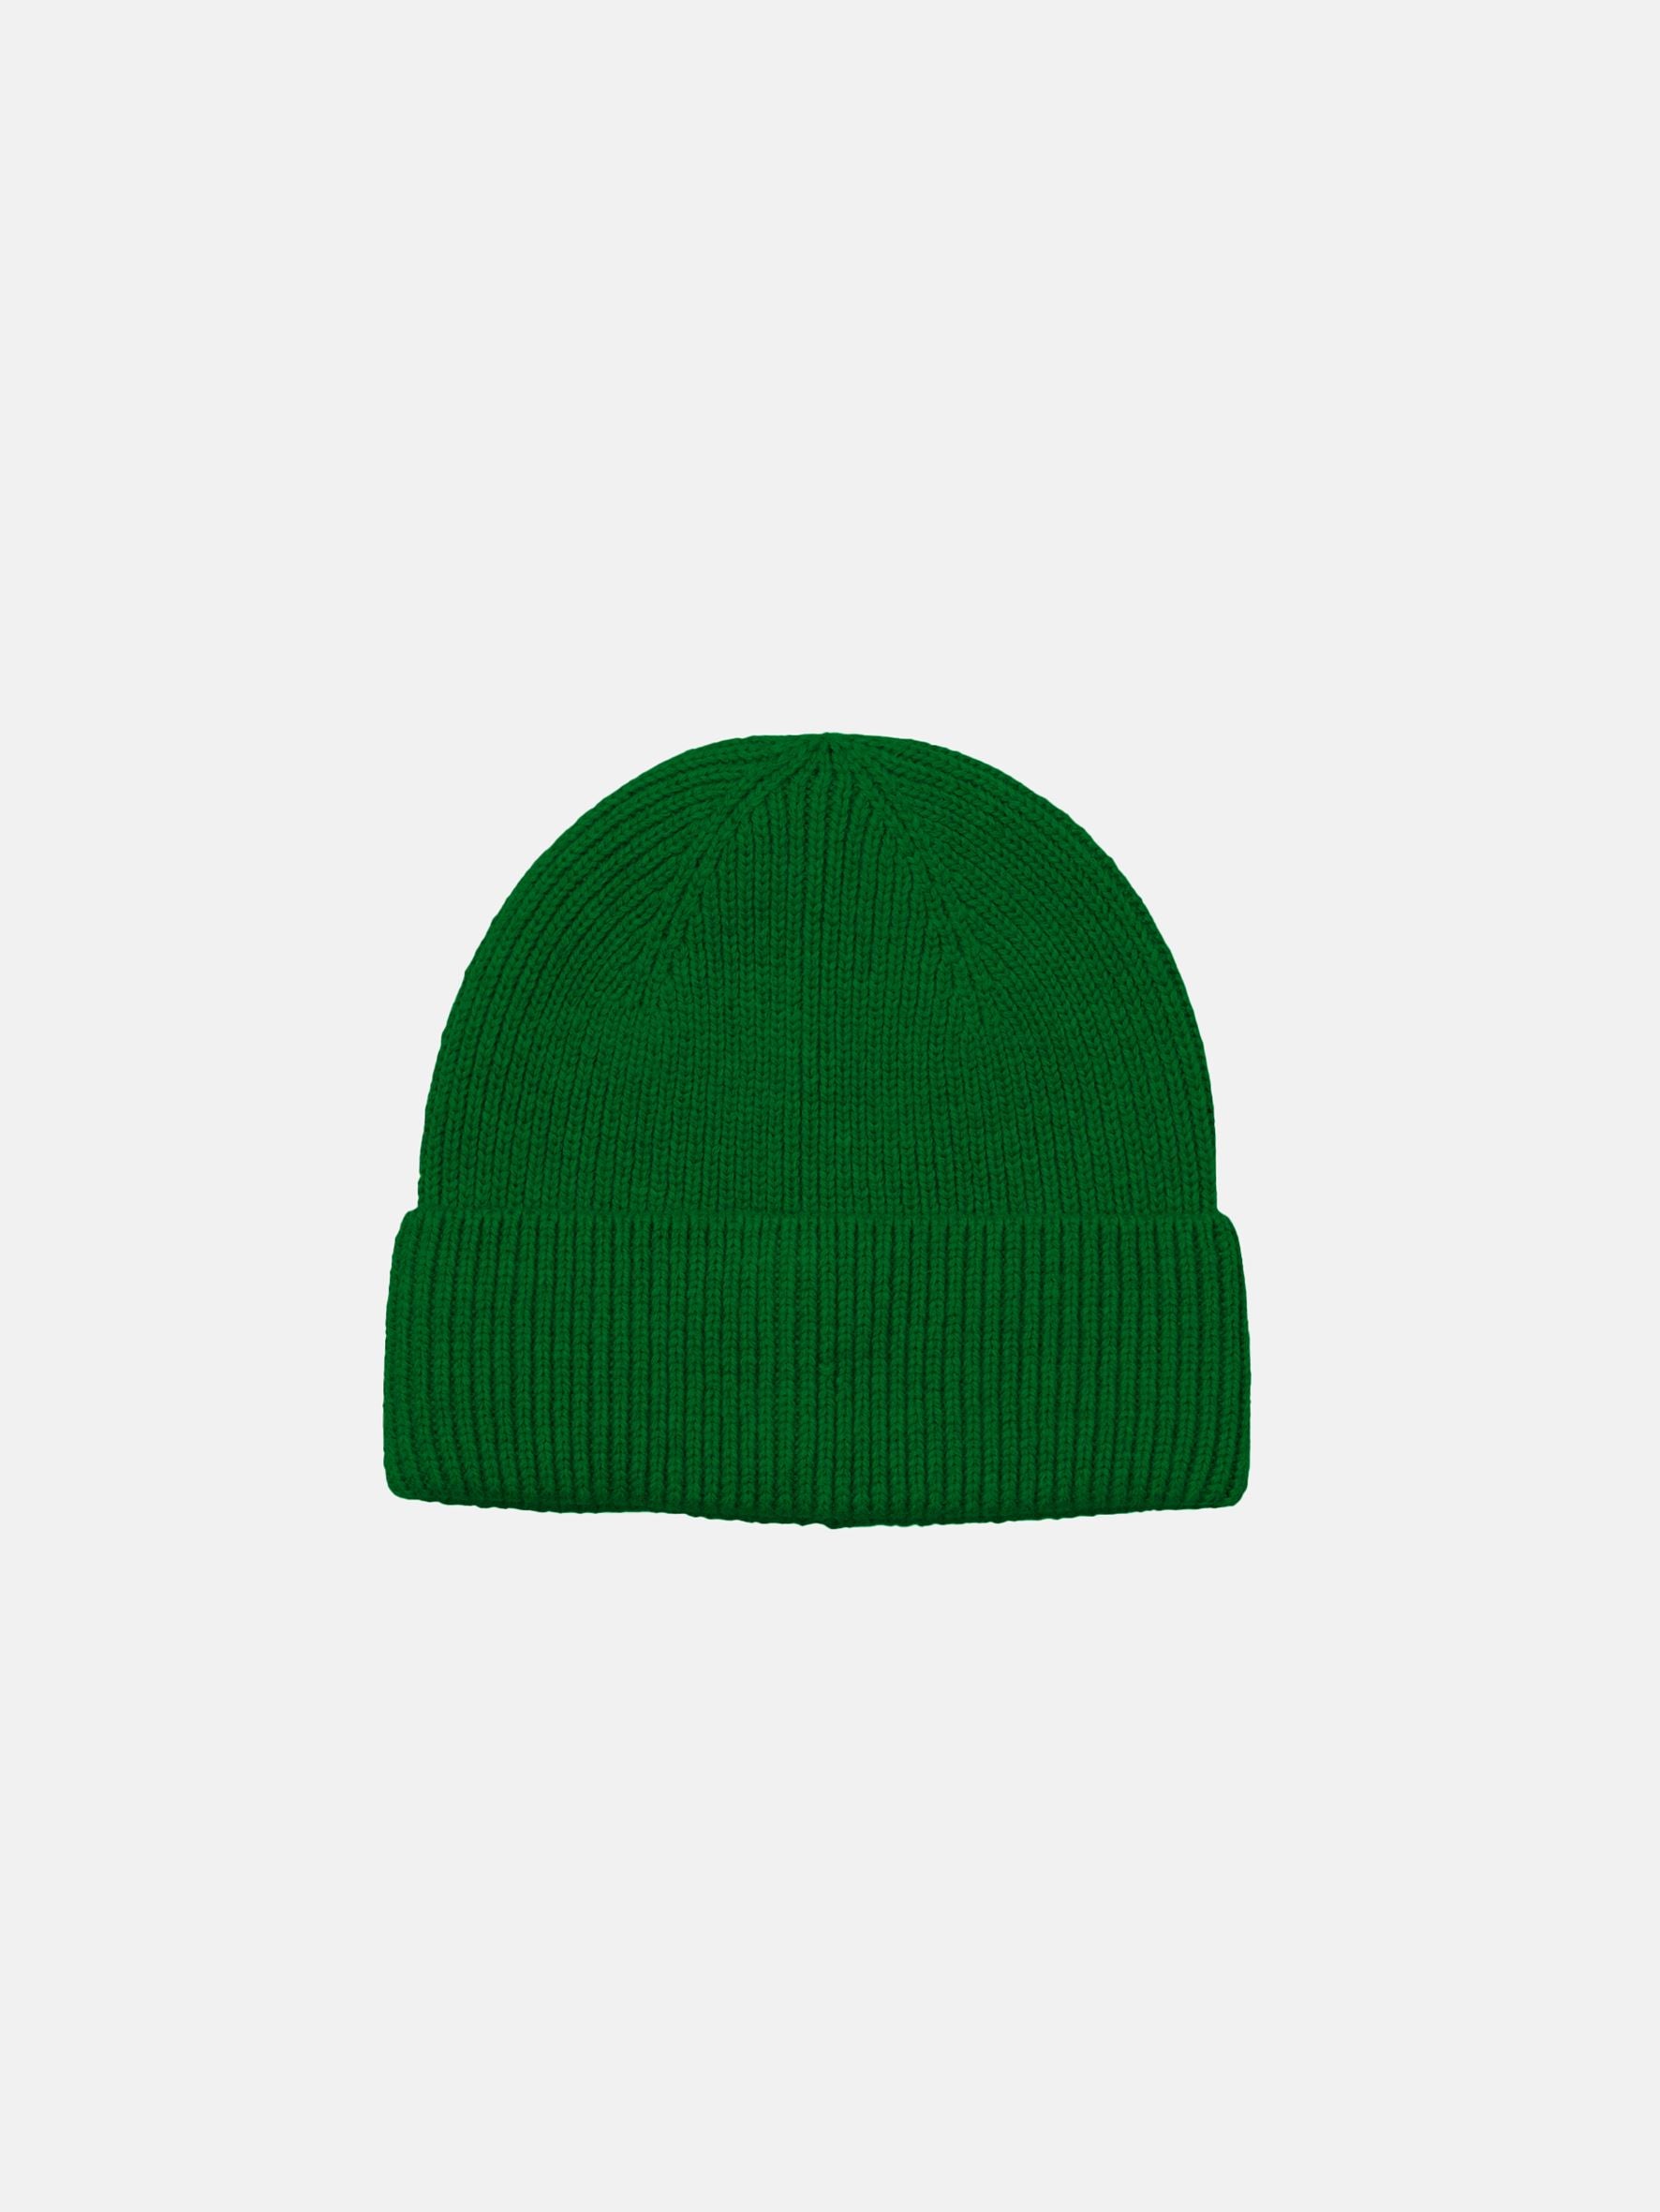 Becksöndergaard, Woona Beanie - Amazon Green , archive, gifts, sale, gifts, sale, archive